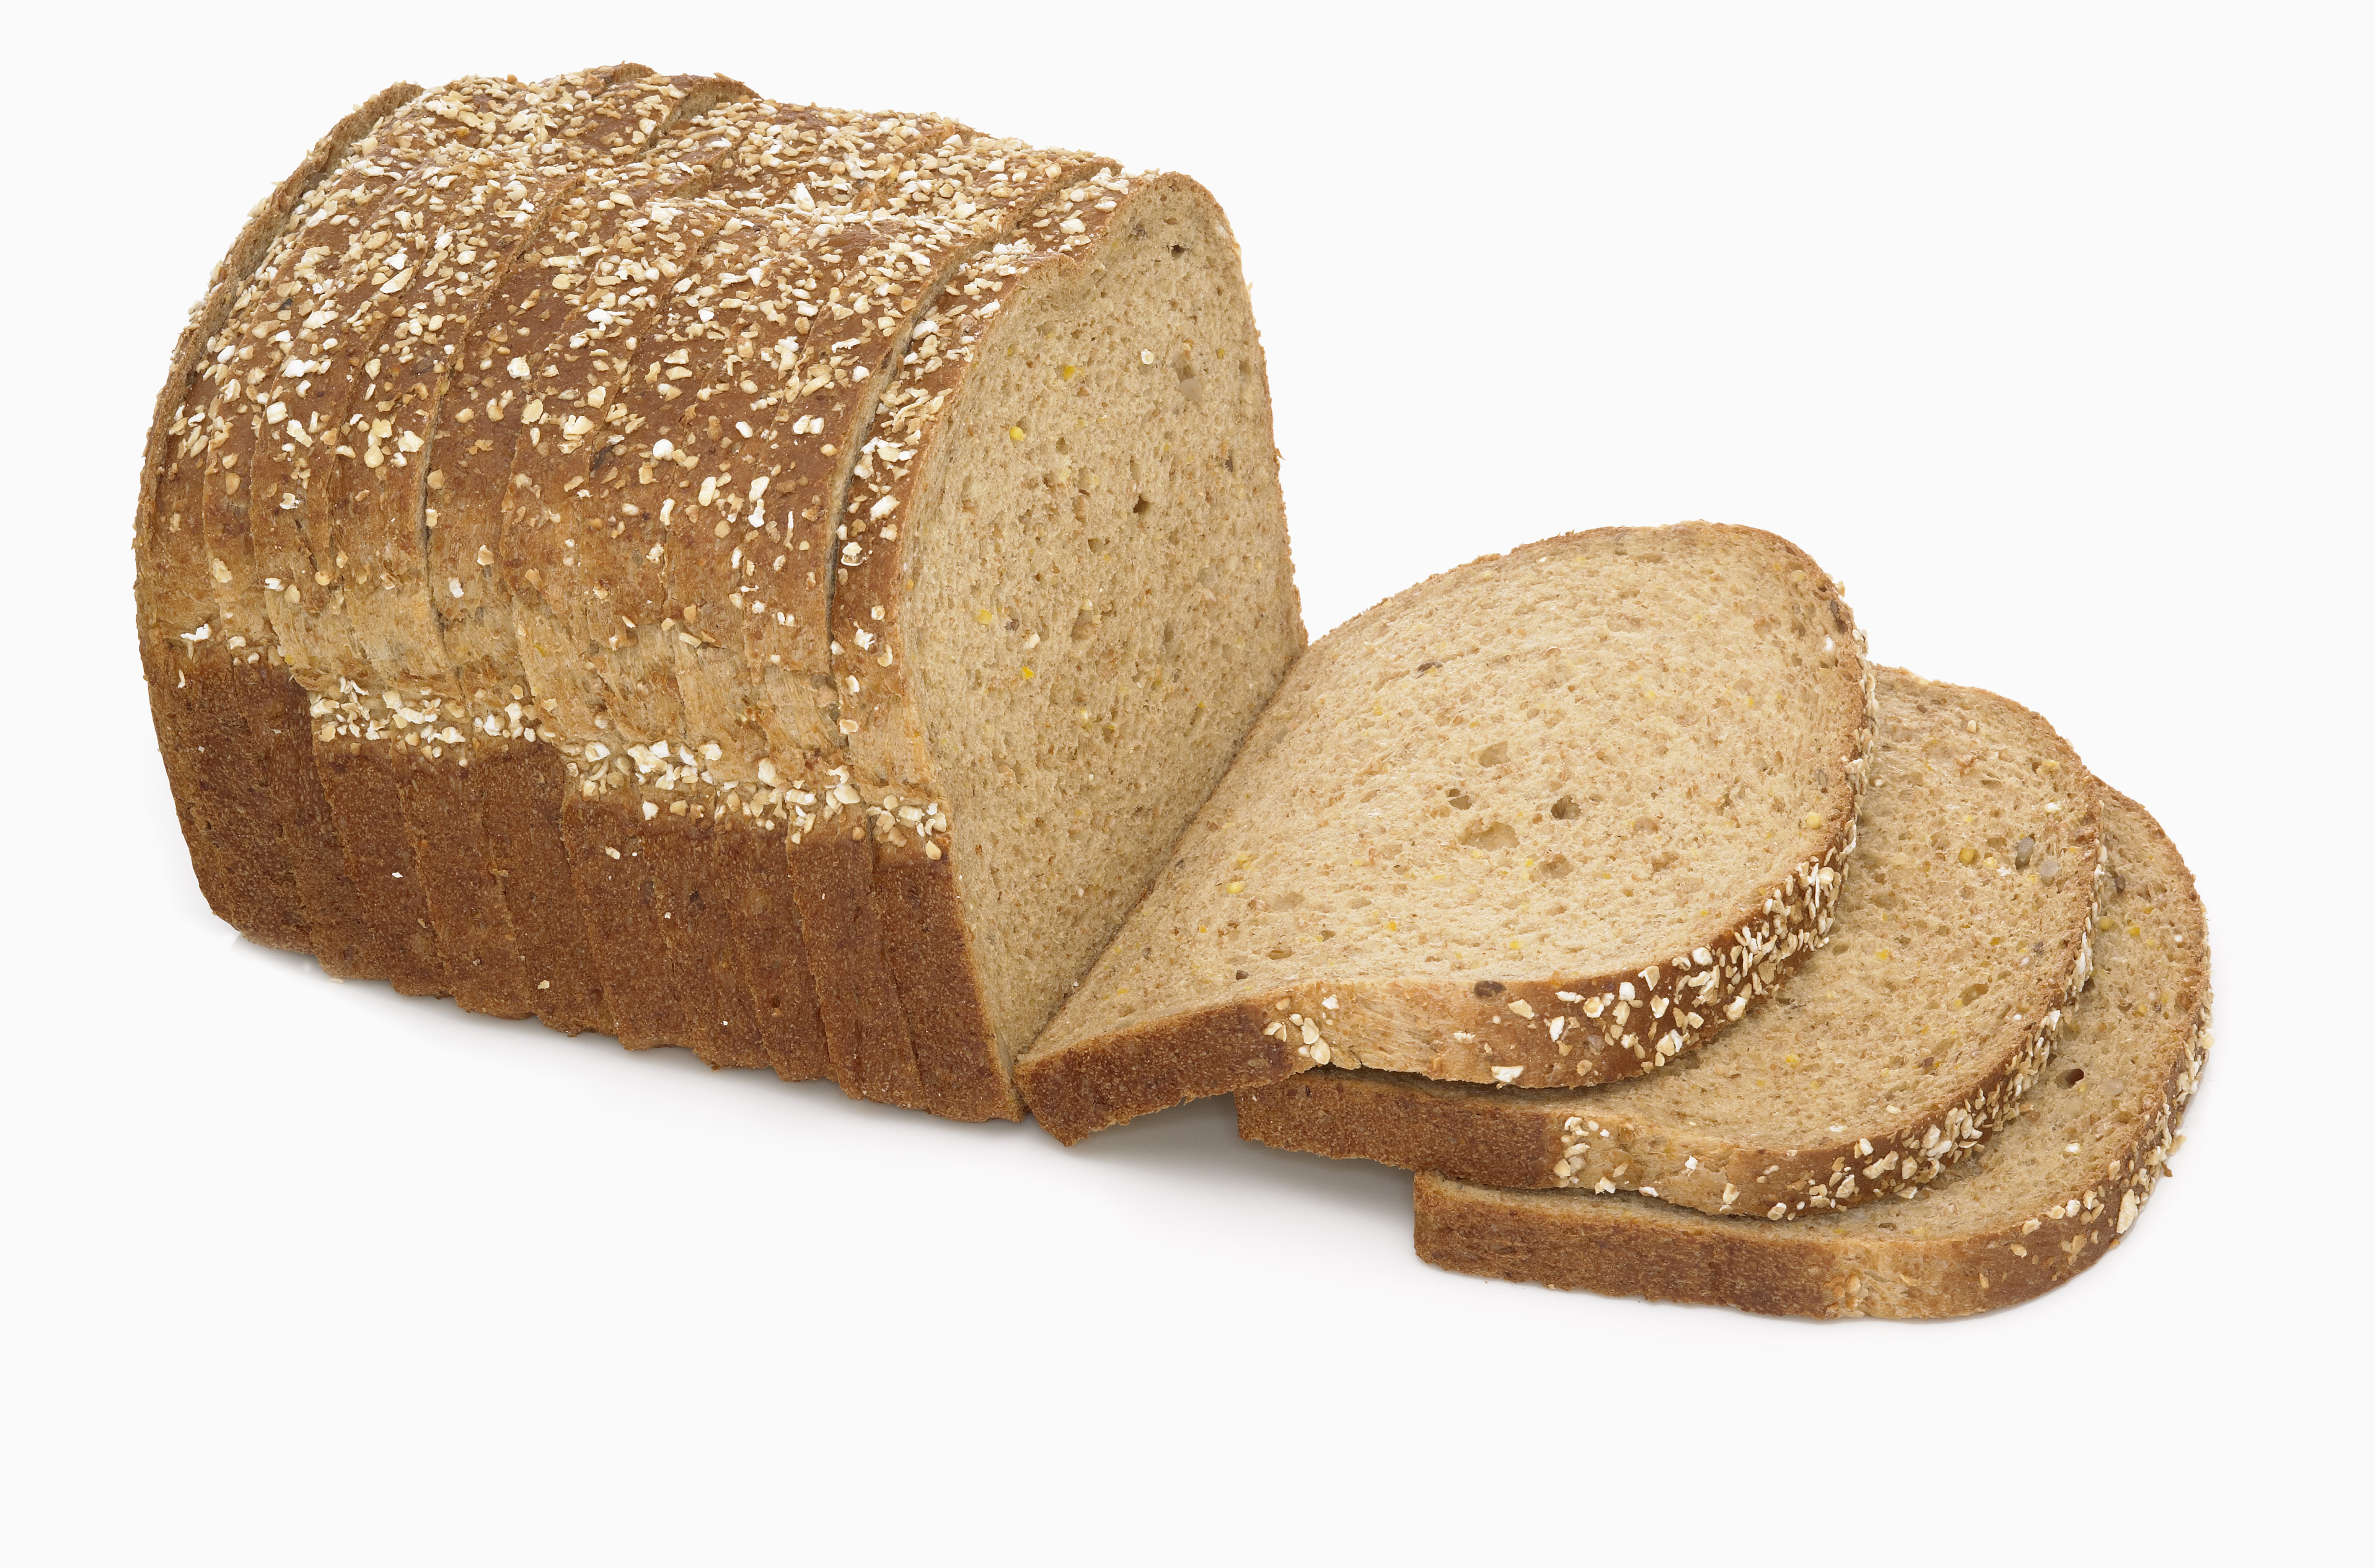 Wholegrain bread releases energy more slowly than white bread, keeping your child going for longer